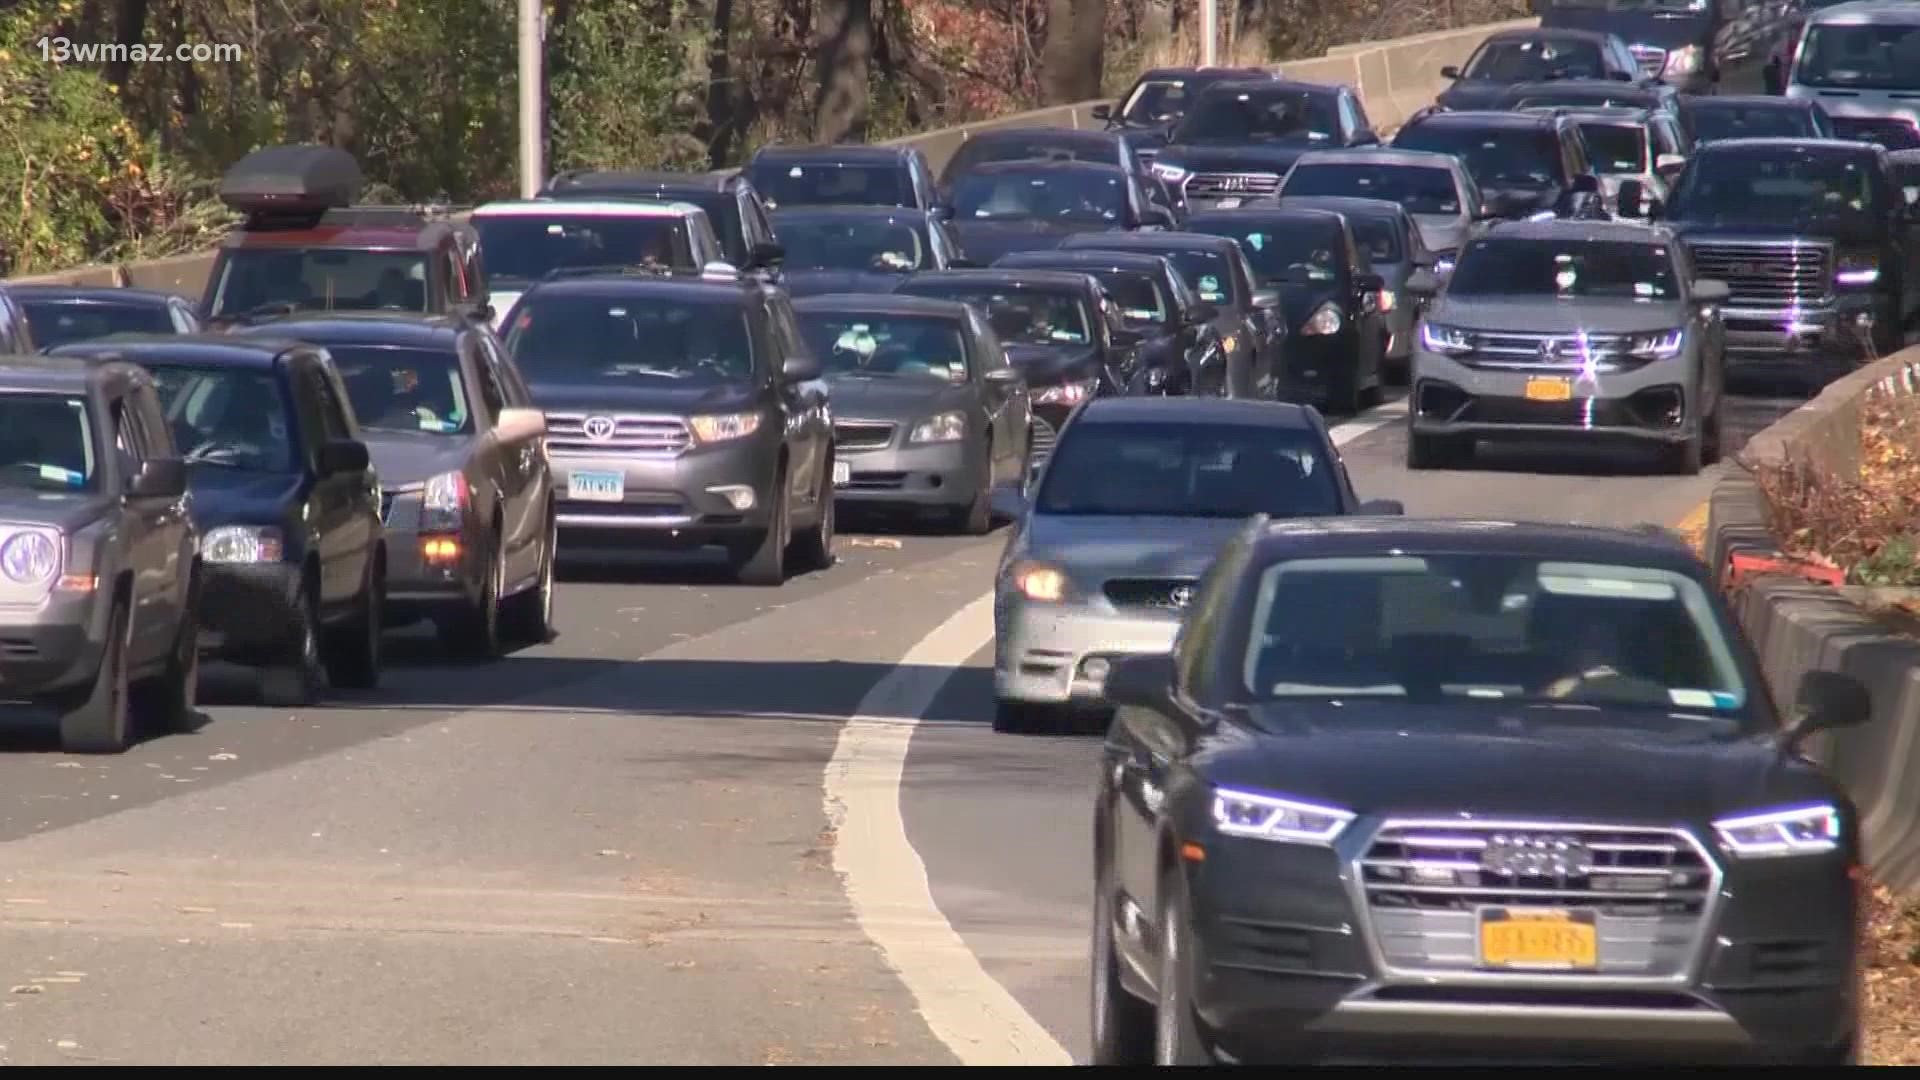 According to AAA, Monday's state average is 2 cents less than a week ago, 12 cents less than last month, and $1.08 more than this time last year.